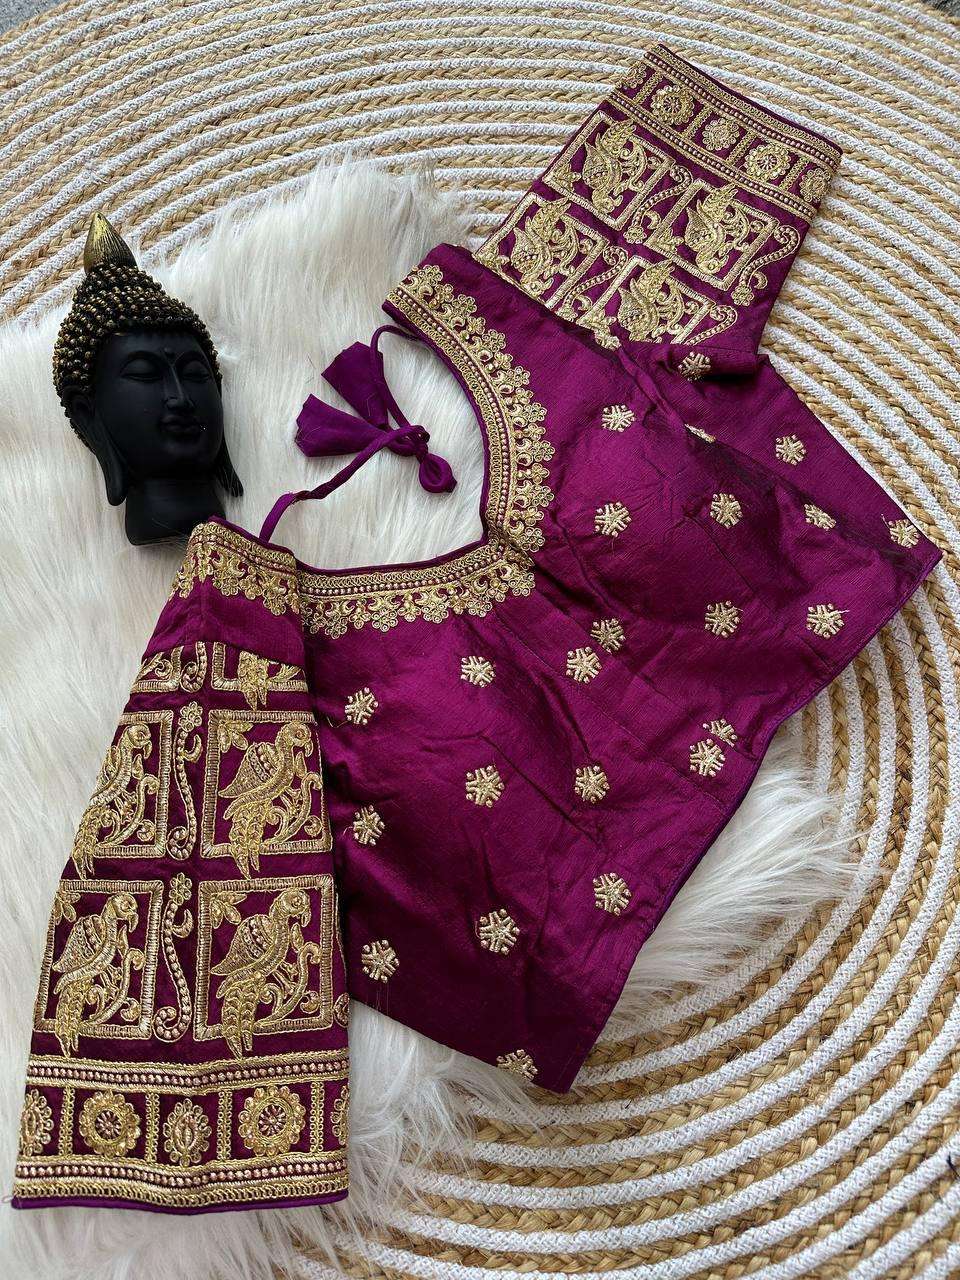 READYMADE BLOUSE SERIES 121 DESIGNER WITH WORK RAW SILK READYMADE BLOUSES ARE AVAILABLE AT WHOLESALE PRICE